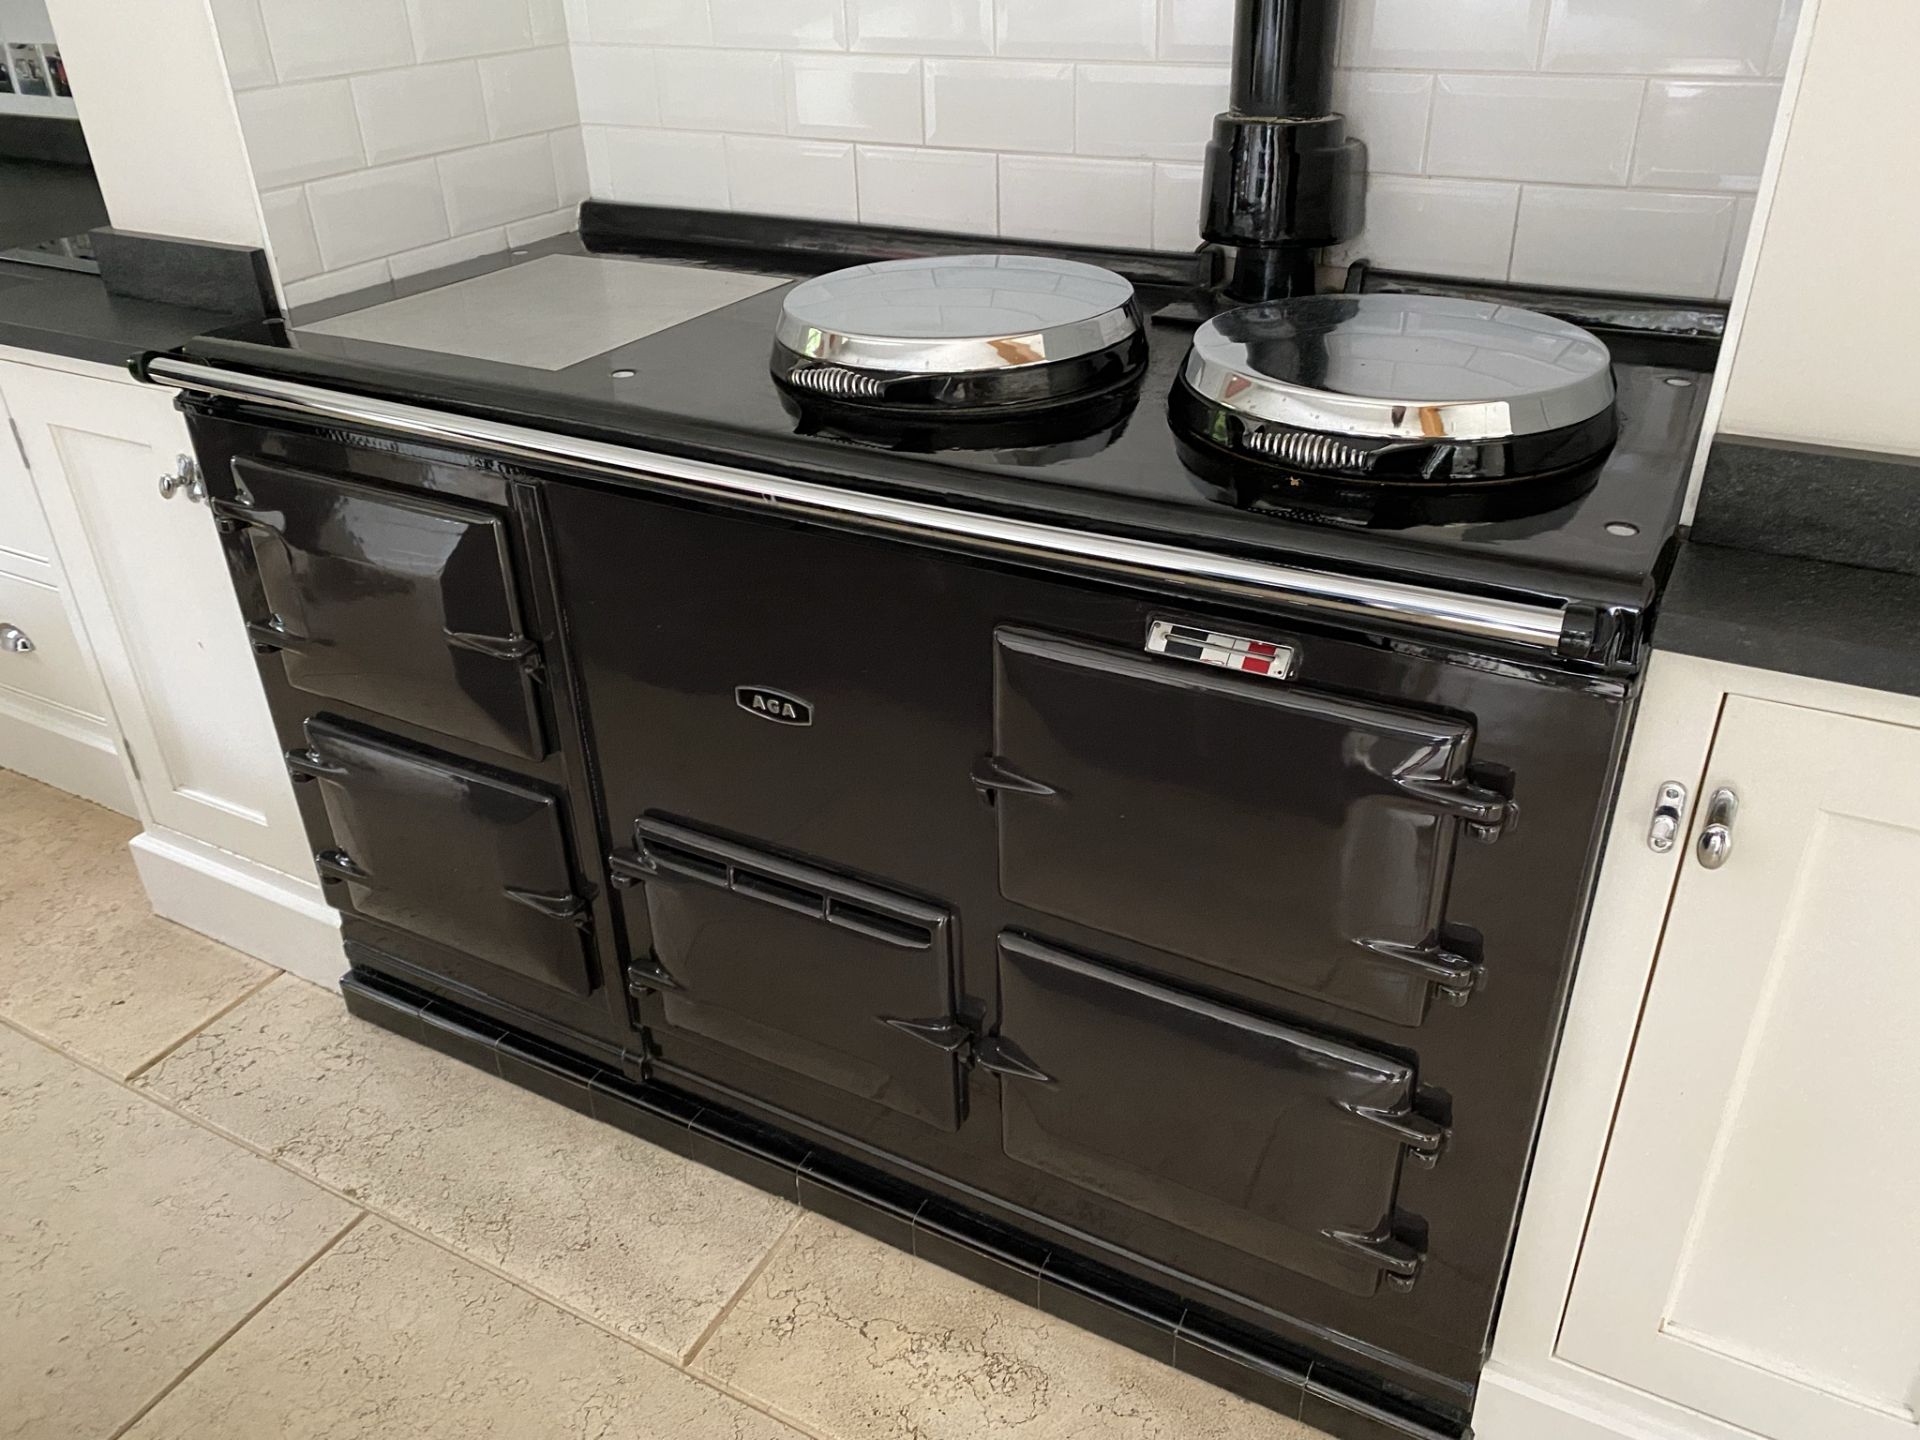 1 x AGA Range Cooker Finished in Black - Features Four Ovens and Two Hot Plates - Recently